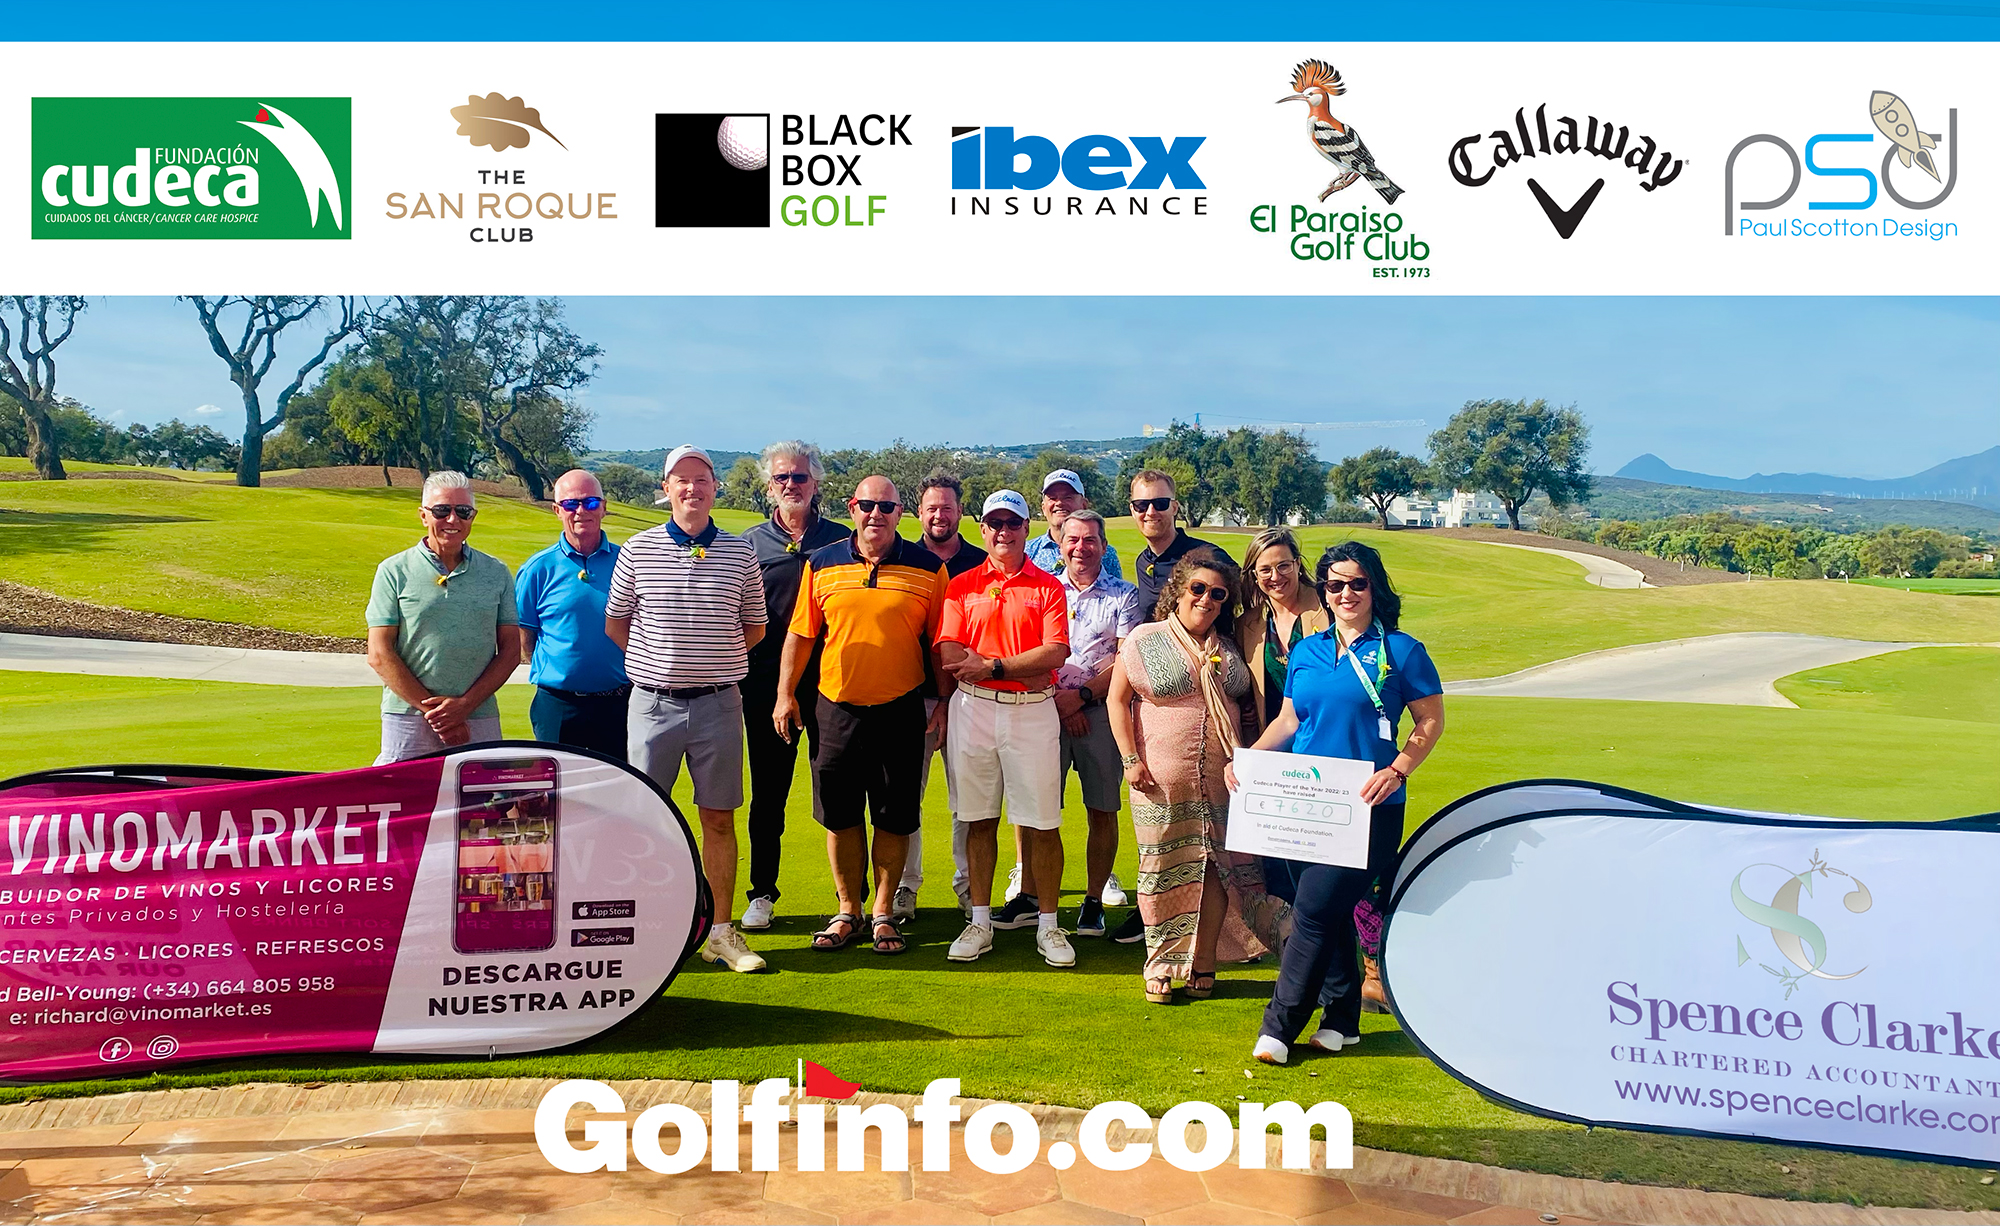 The Cudeca Player of the Year 2022/ 23 powered by Golfinfo.com raised € 7,620 to palliative care provided by Cudeca Foundation in the province of Málaga